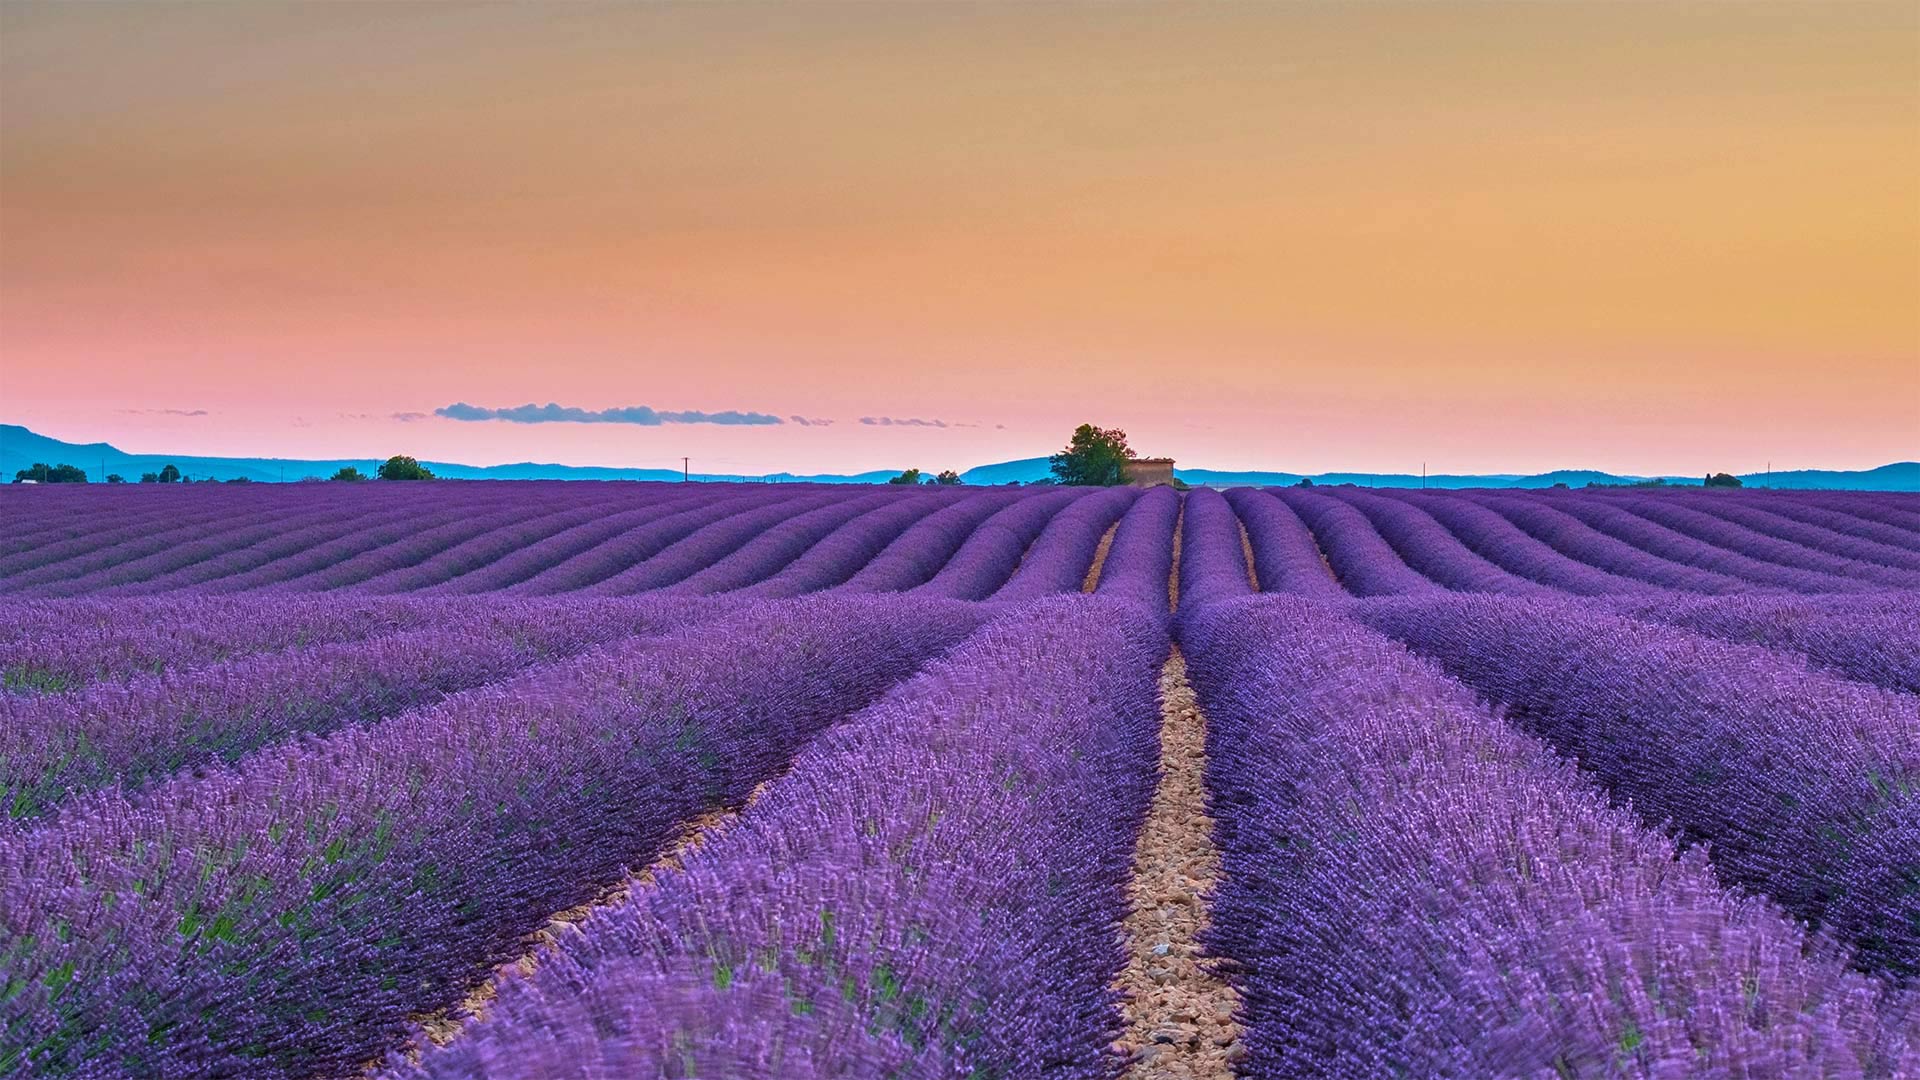 Lavender fields on the Valensole Plateau in Provence, France - Shutterstock)